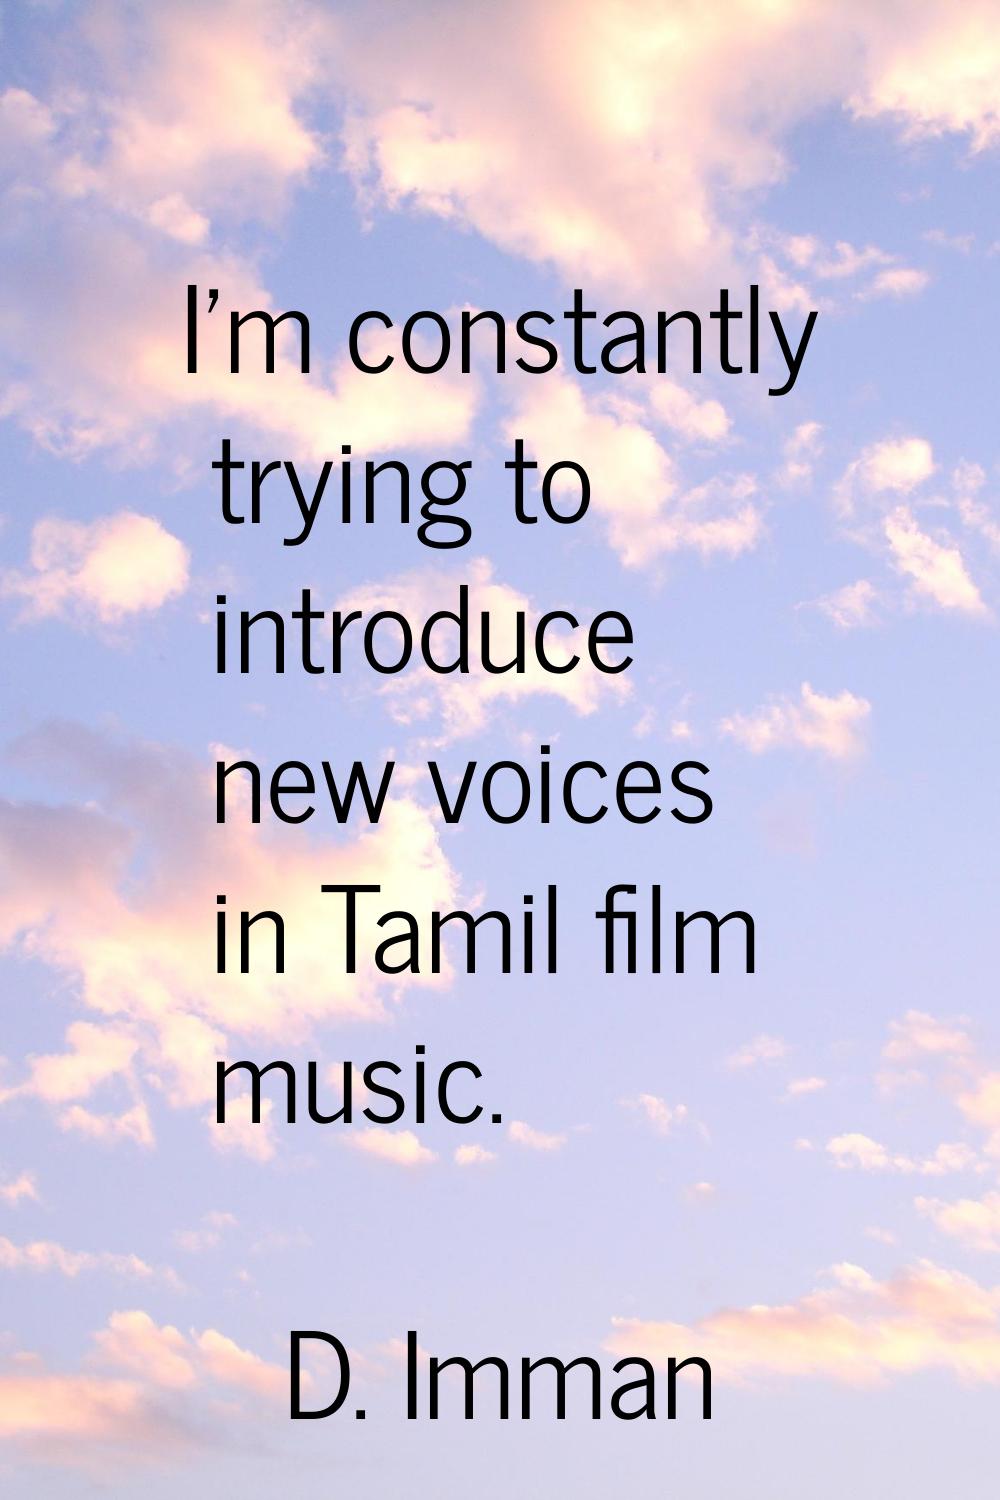 I'm constantly trying to introduce new voices in Tamil film music.